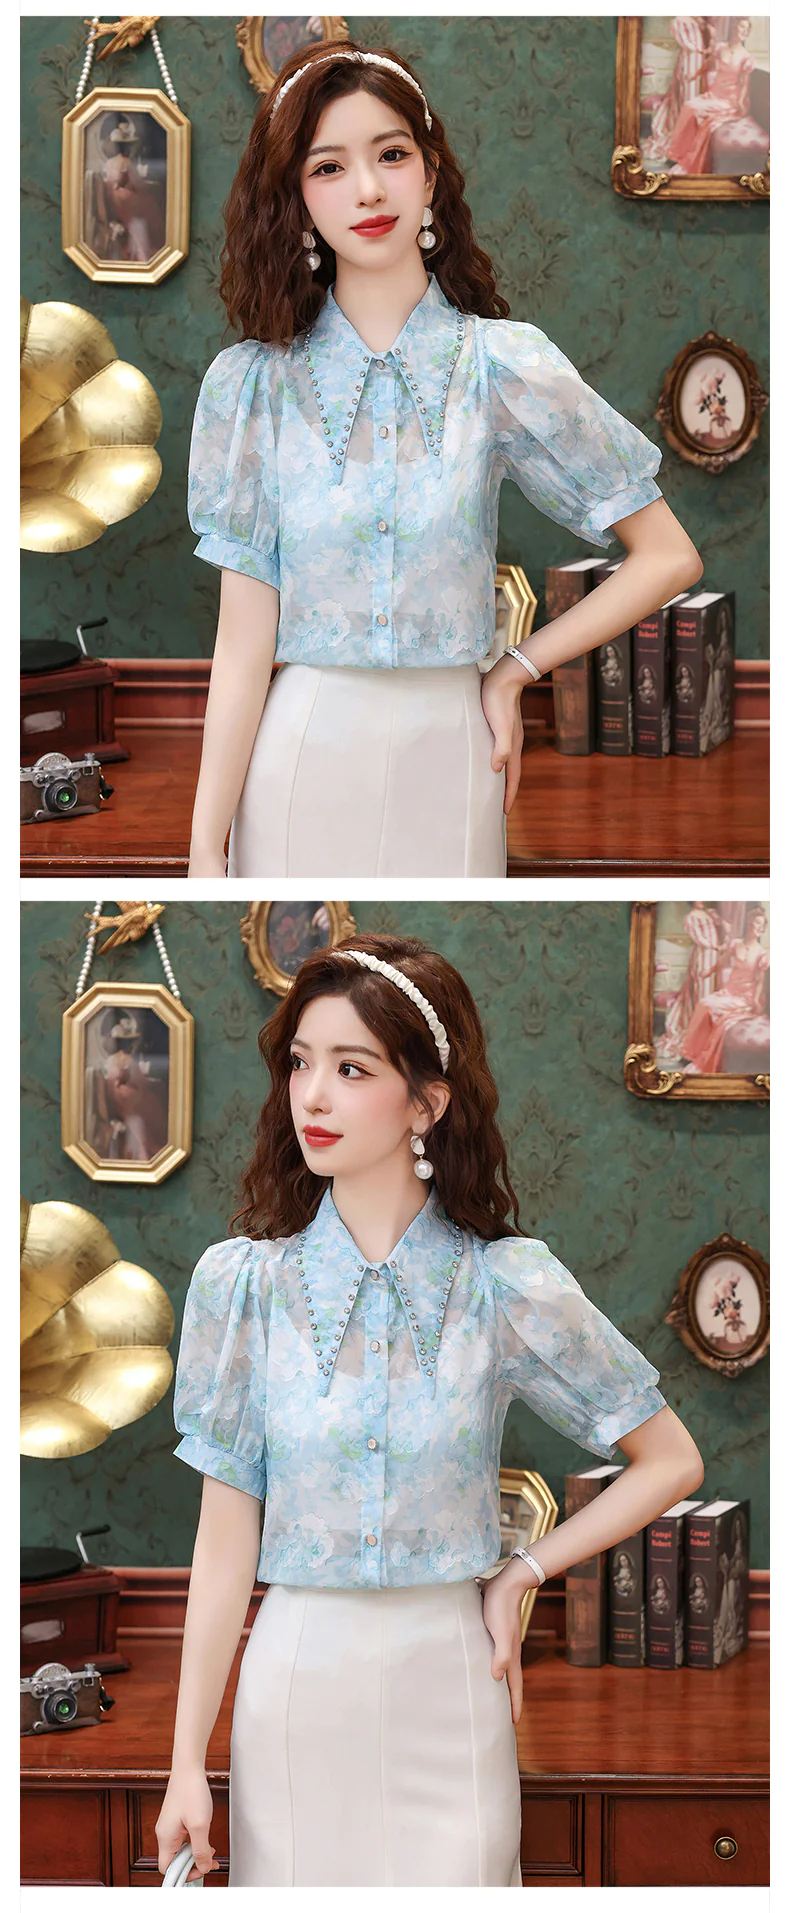 Beautiful-French-Style-Blue-Floral-Chiffon-Shirt-with-Short-Puff-Sleeves16